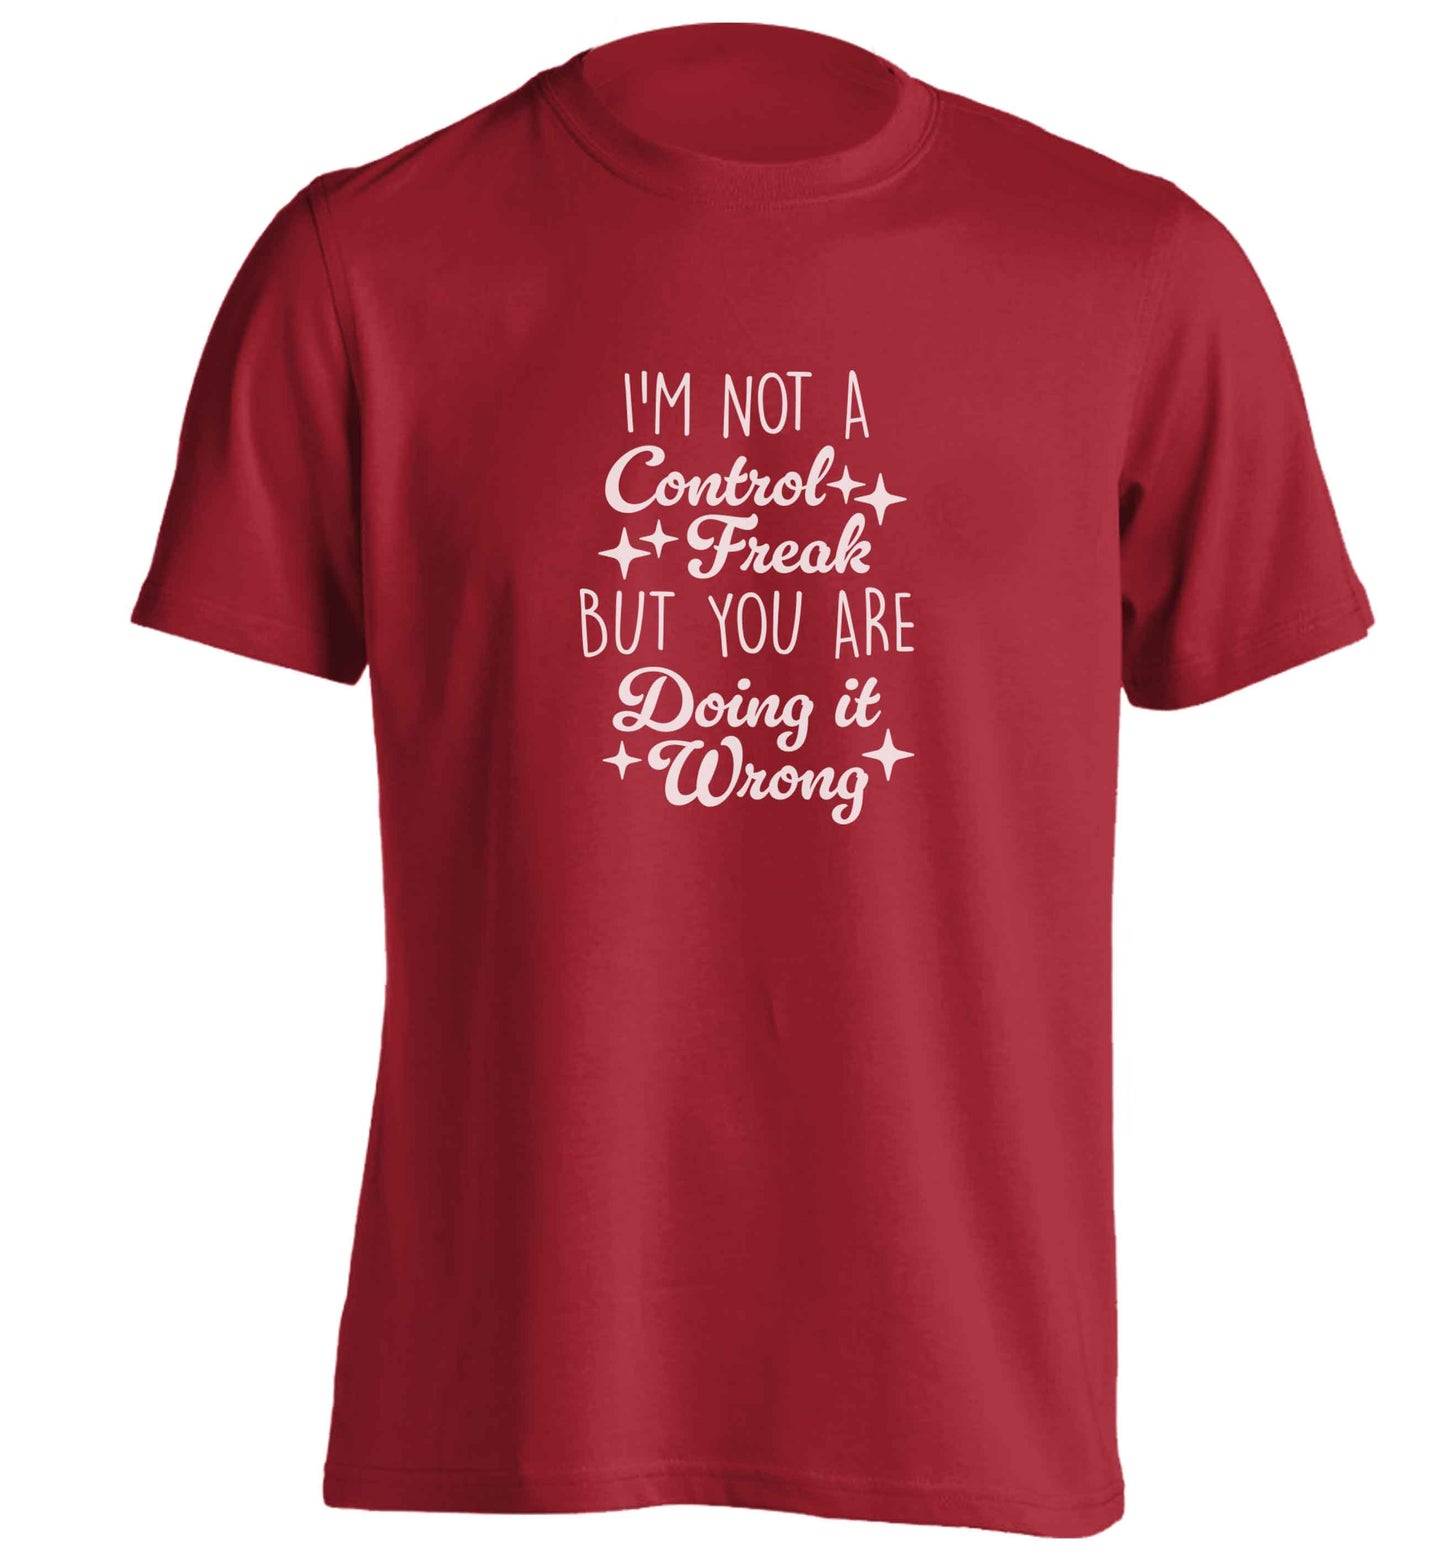 I'm not a control freak but you are doing it wrong adults unisex red Tshirt 2XL